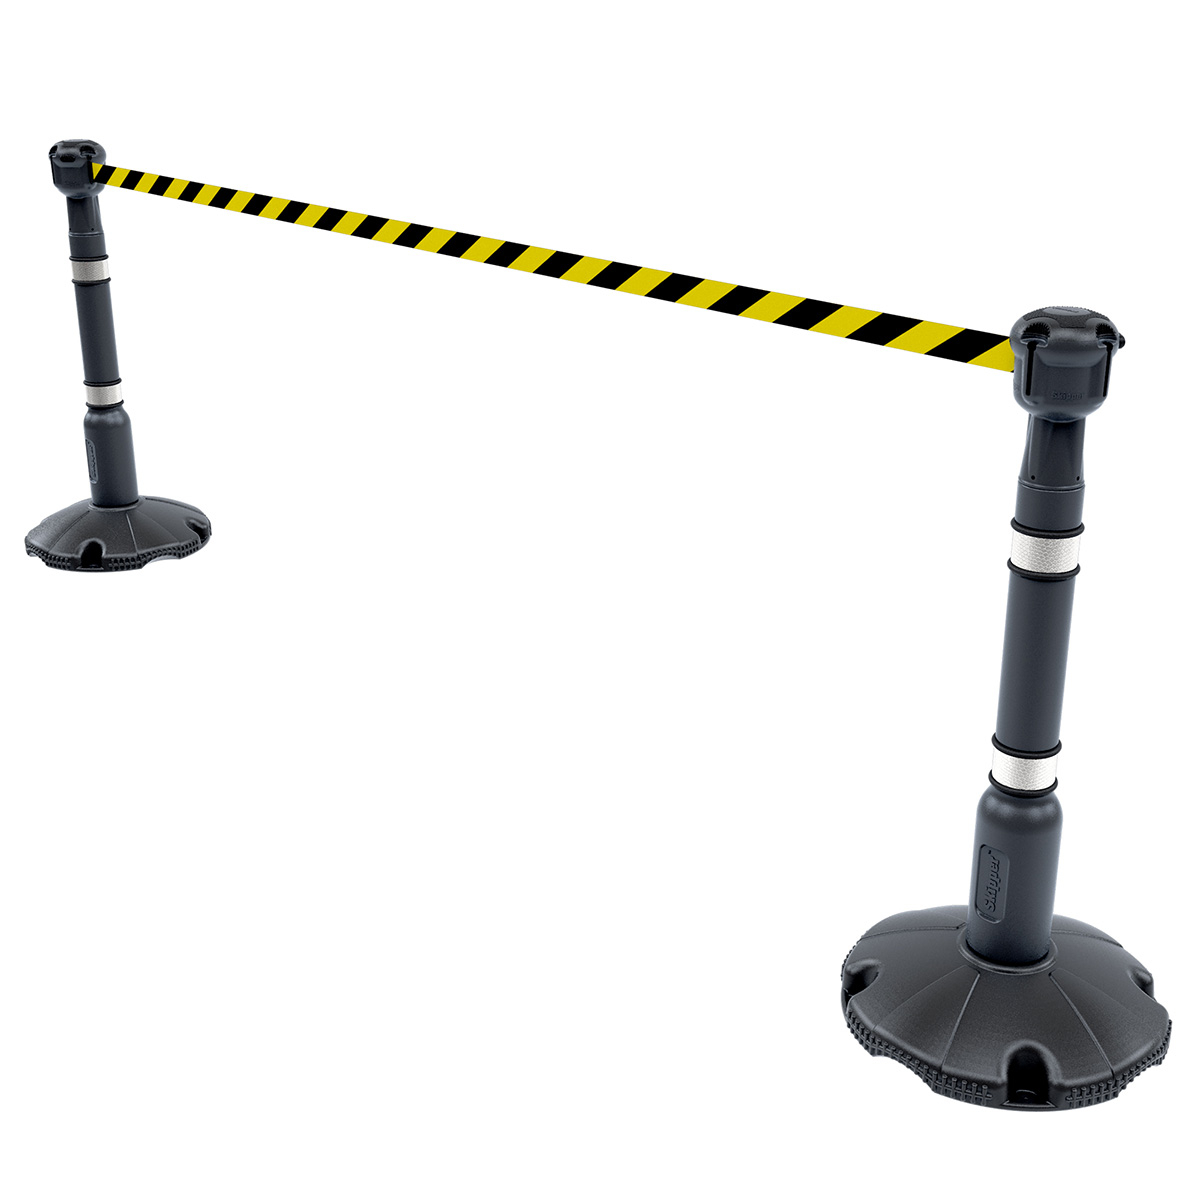 Skipper™ Retractable Barrier Kit 9m Can be Used Indoors and Outdoors